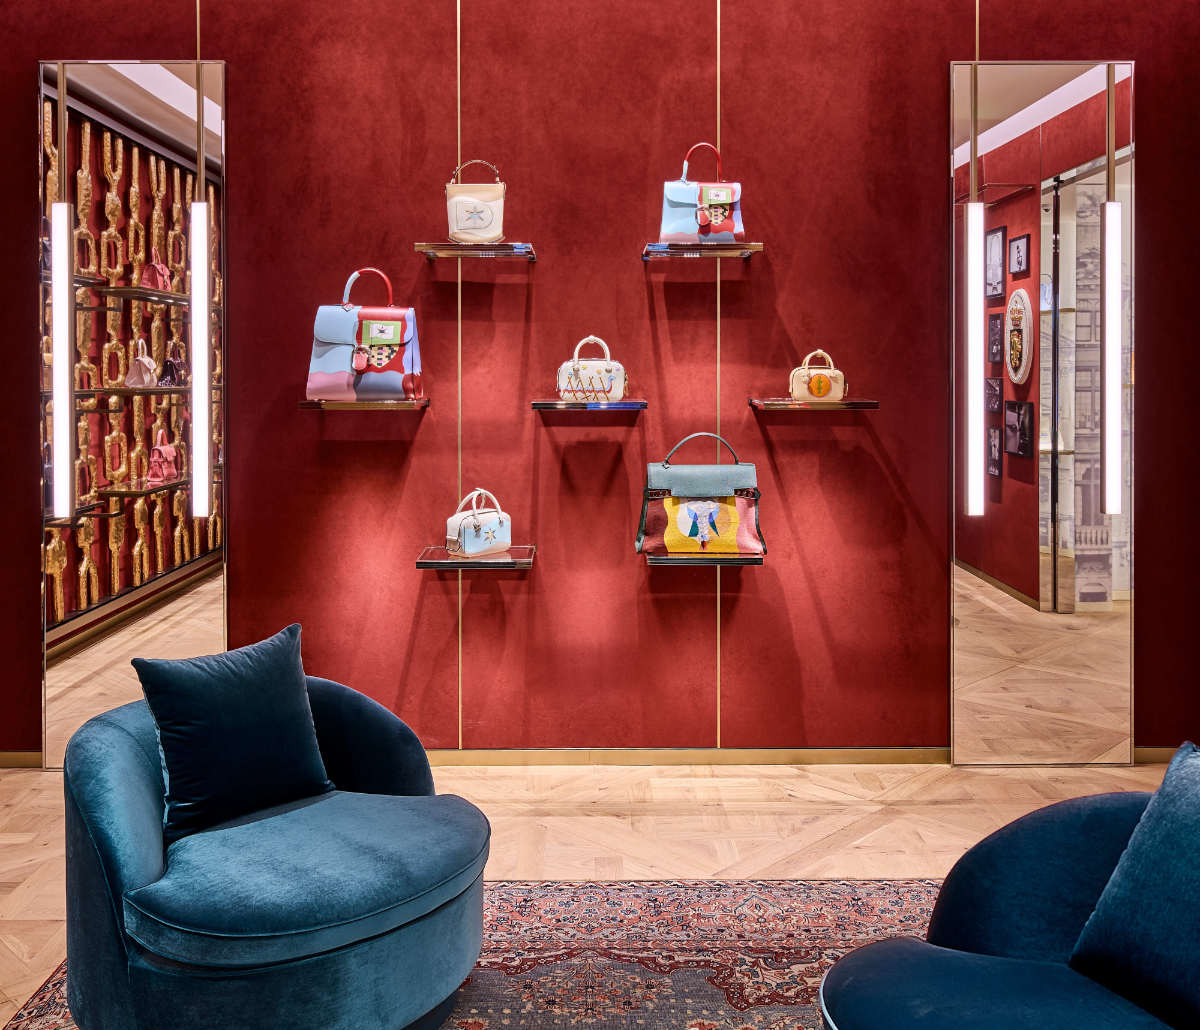 Delvaux Unveils Its Maiden Chinese Flagship In Beijing’s Wang Fu Central